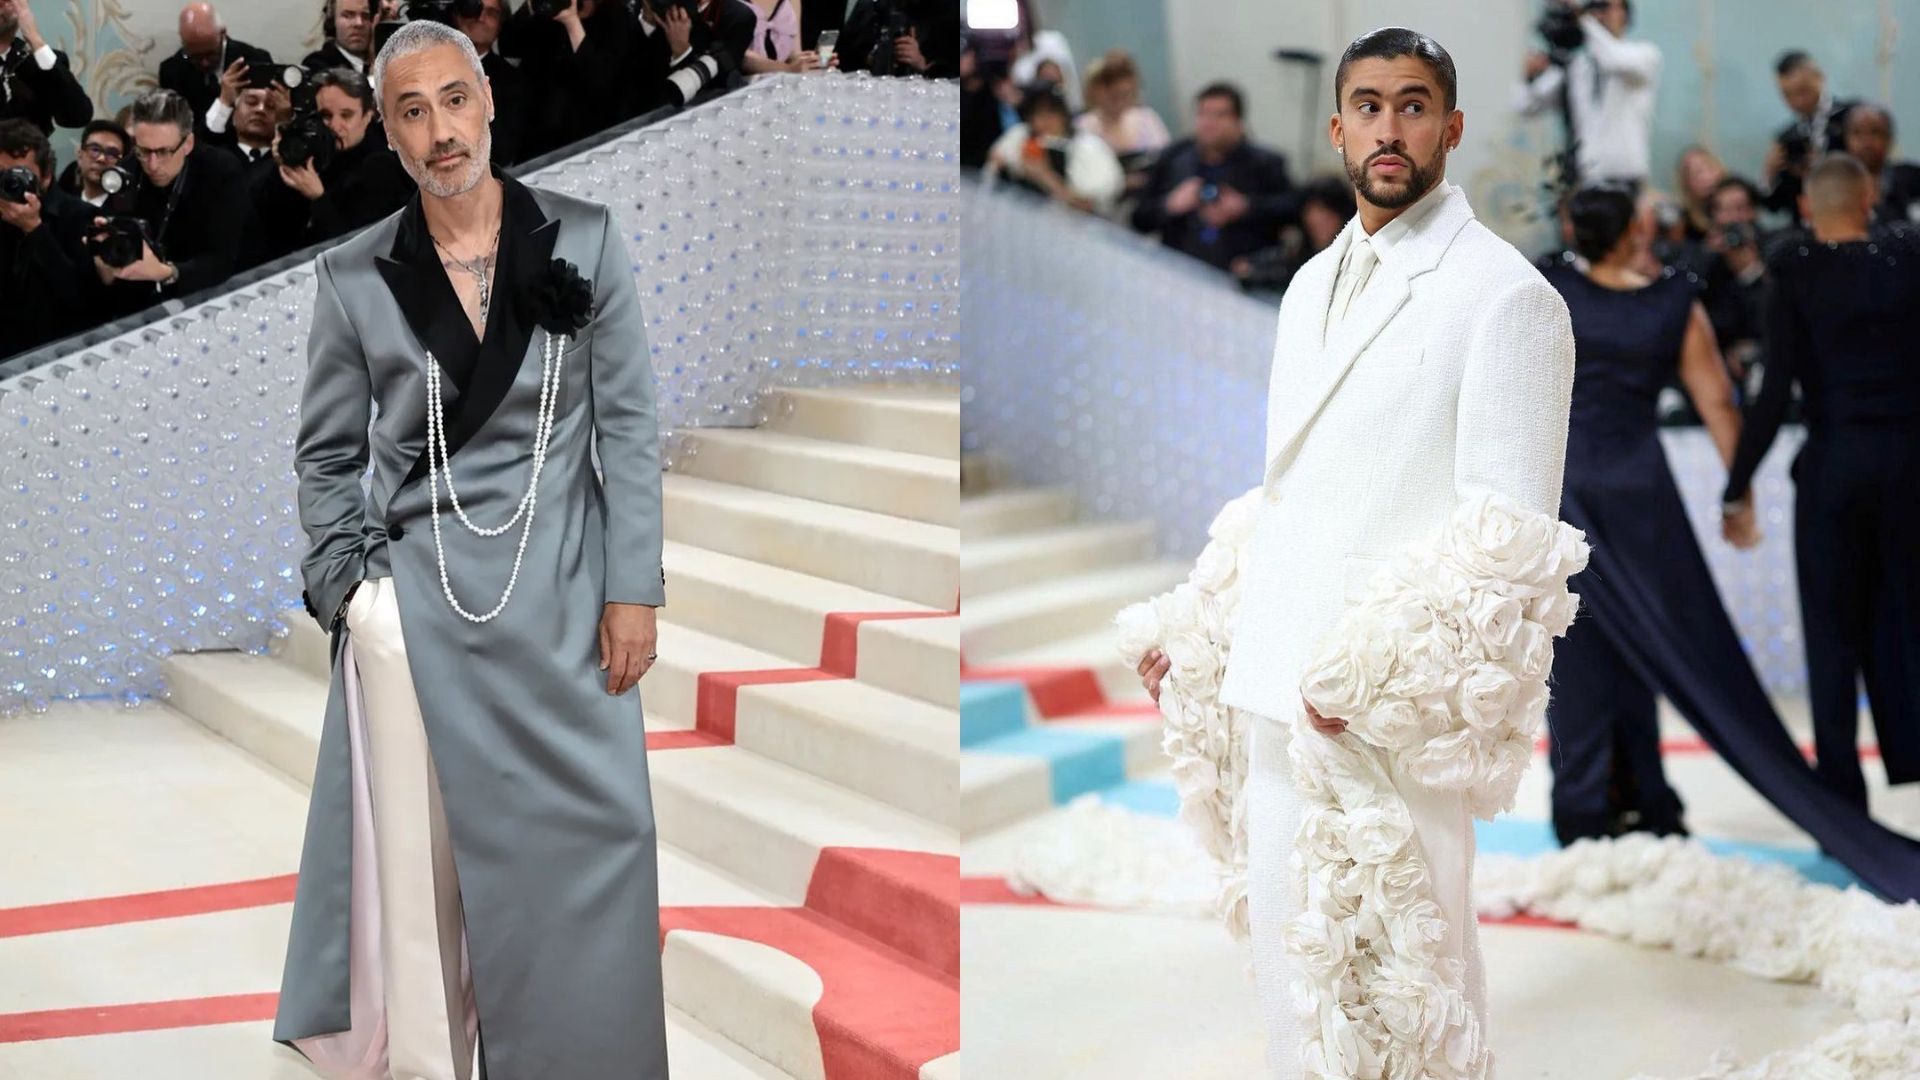 Met Gala 2023 See Every Celebs Red Carpet Fashion Full Guest List  Revealed Photos  2023 Met Gala Extended Fashion Met Gala  Just  Jared Celebrity News and Gossip  Entertainment